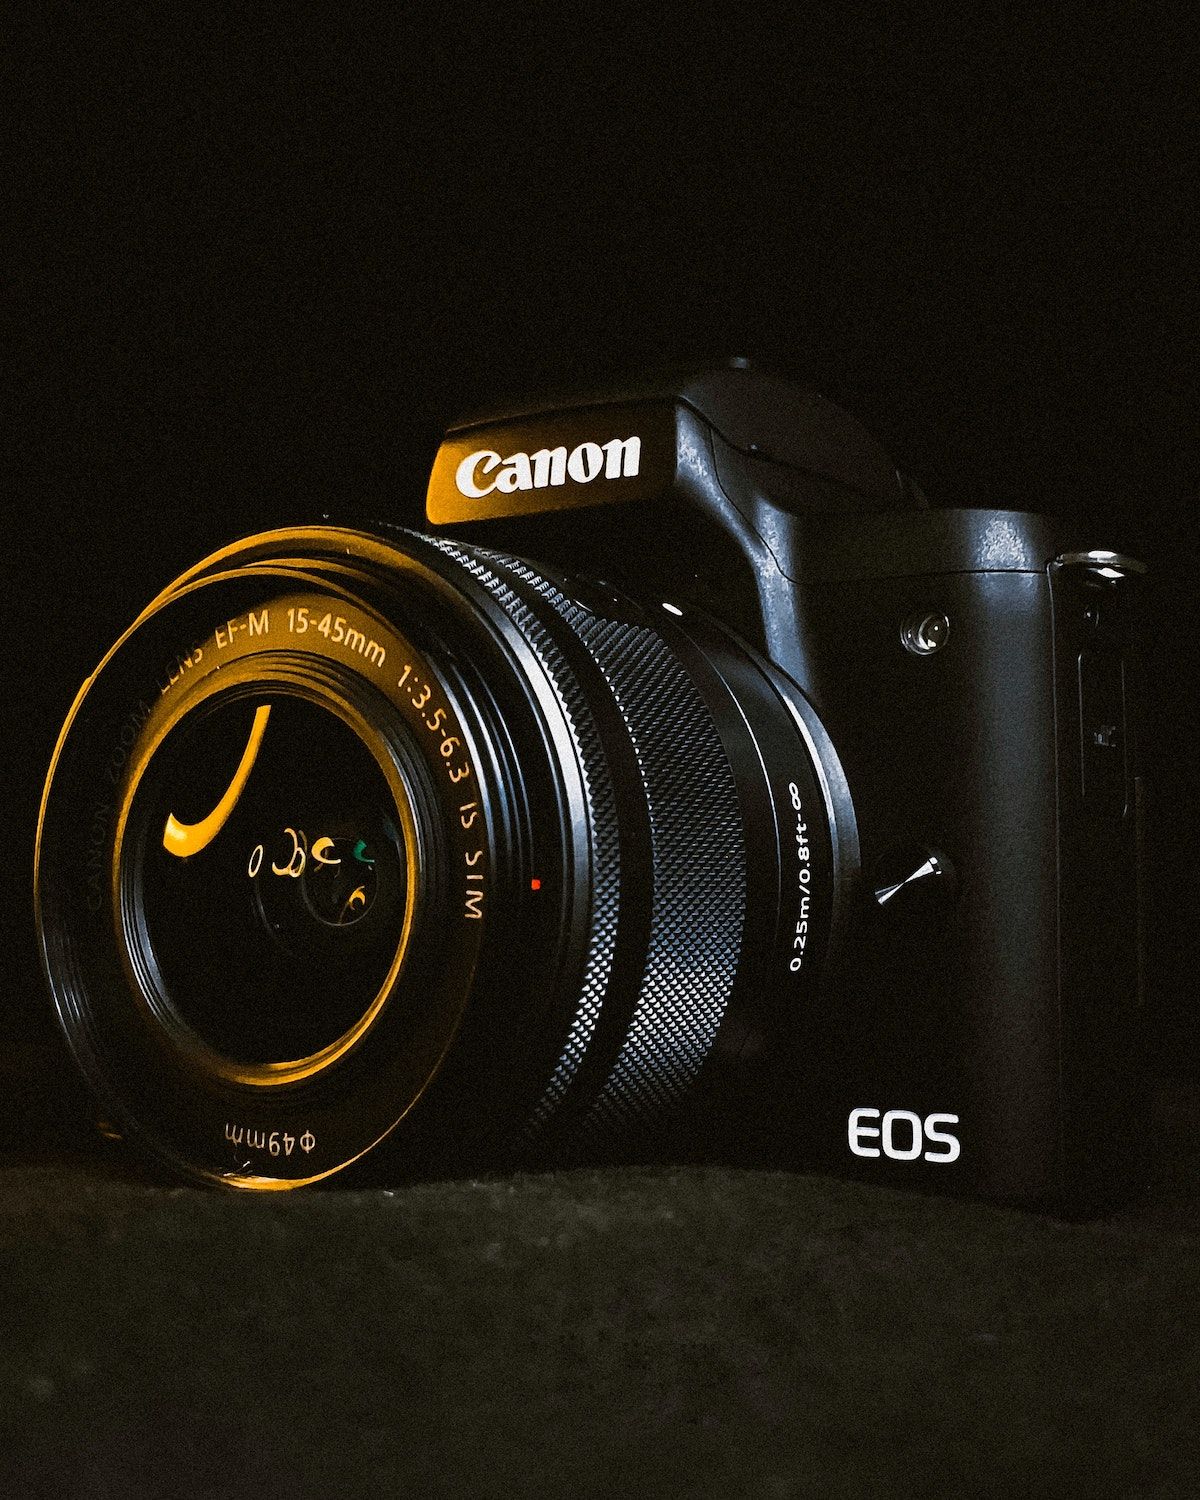 Canon EOS M50 Mark II key features